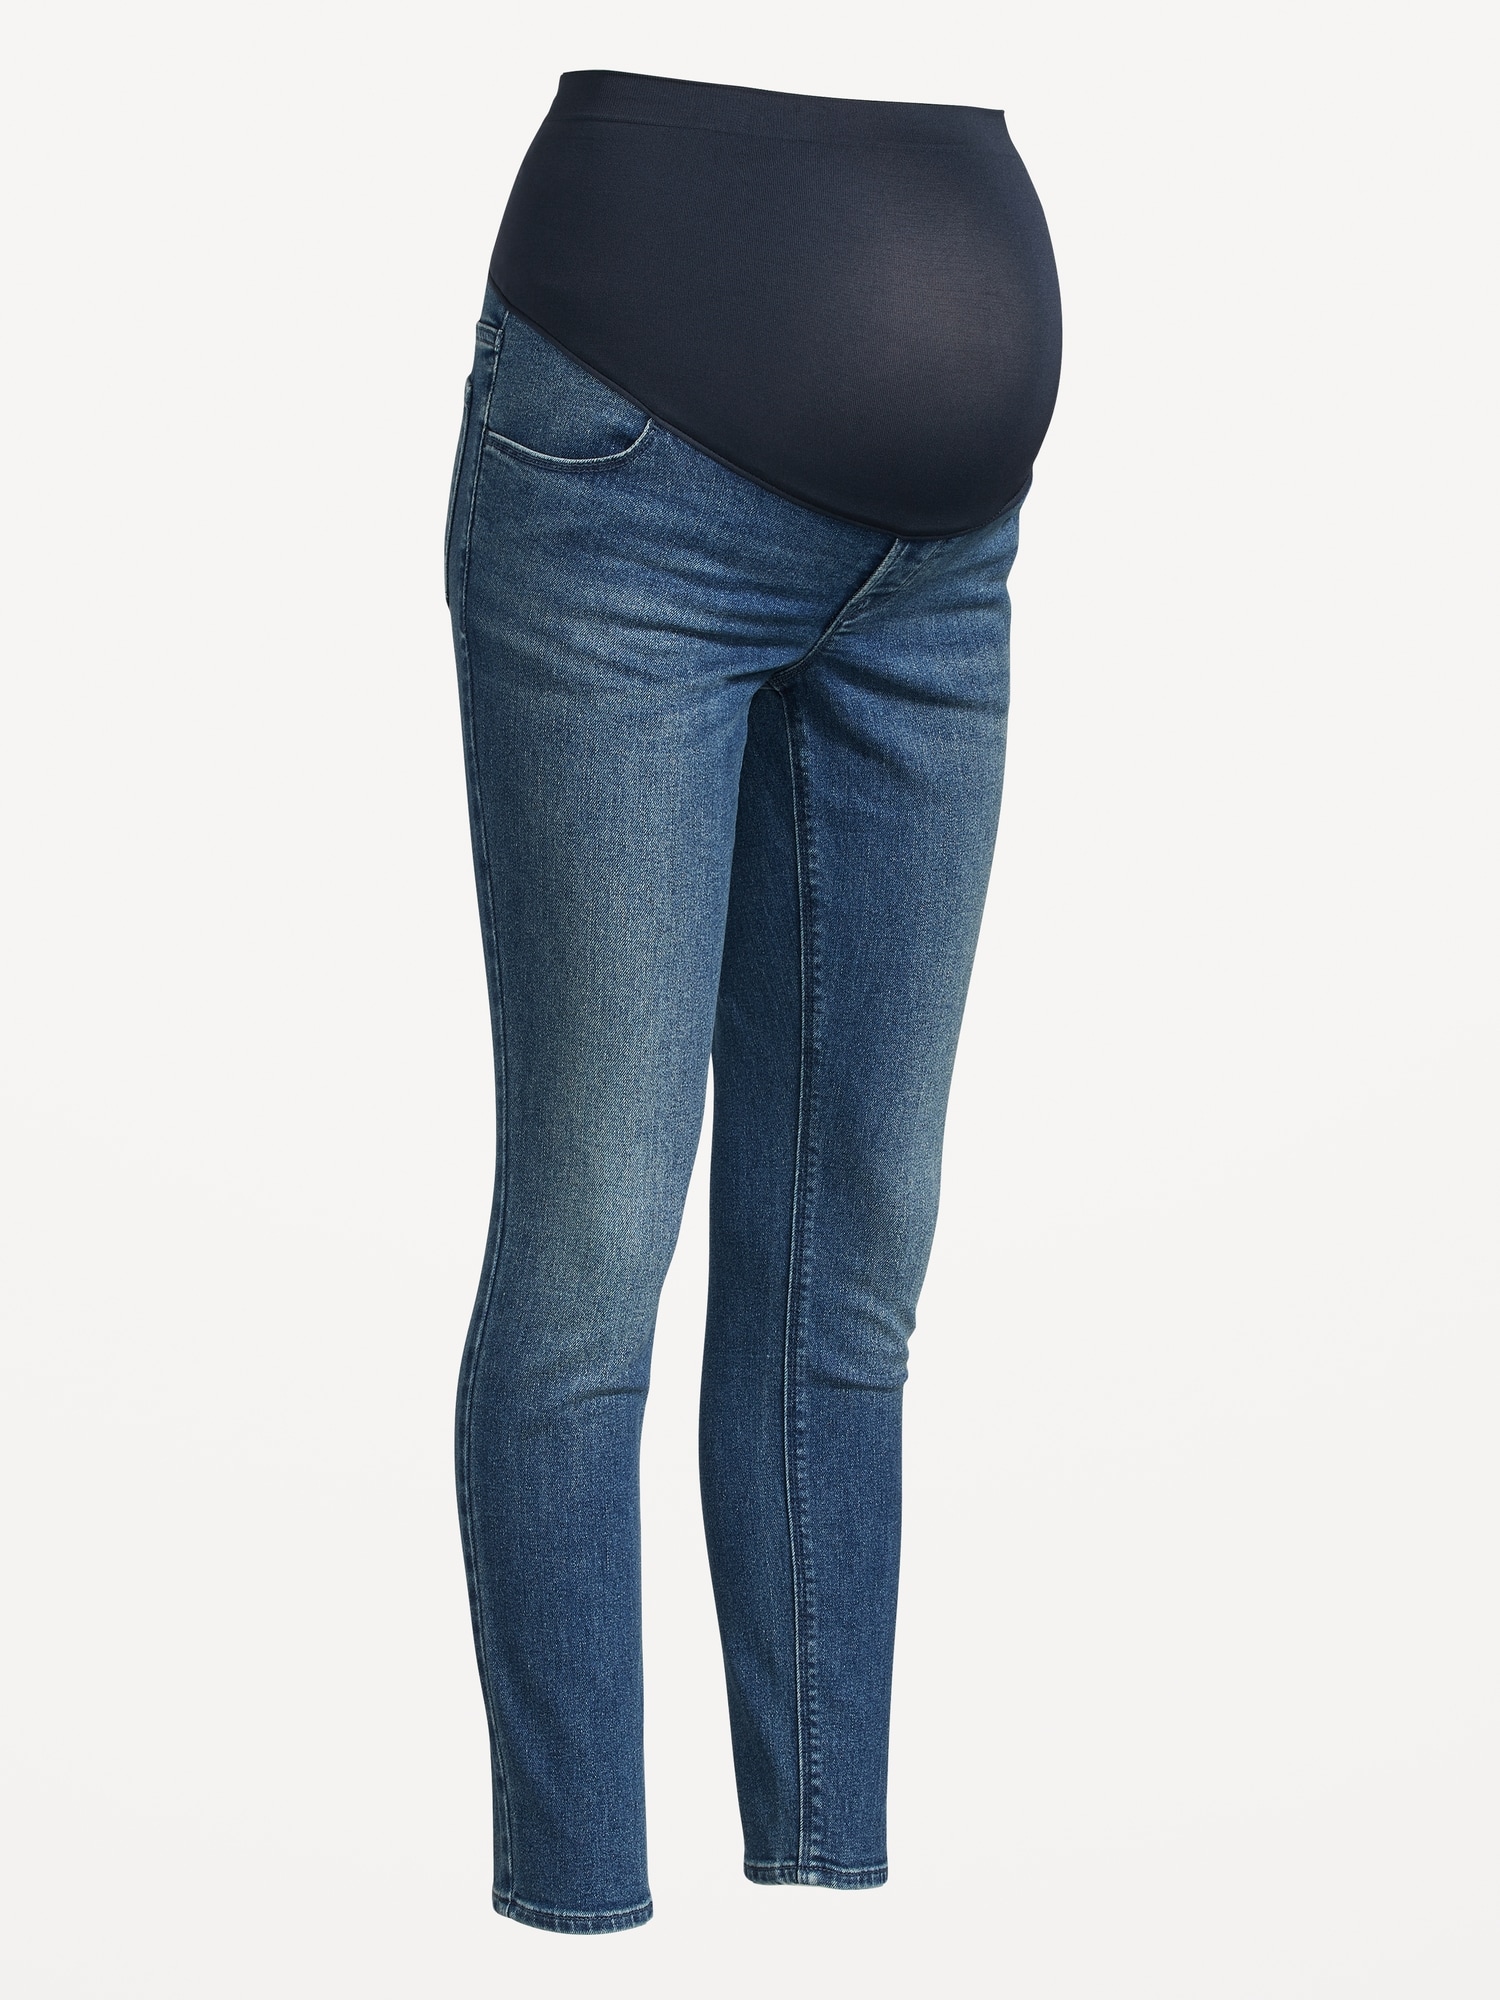 Petite Maternity Jeans | Old Navy